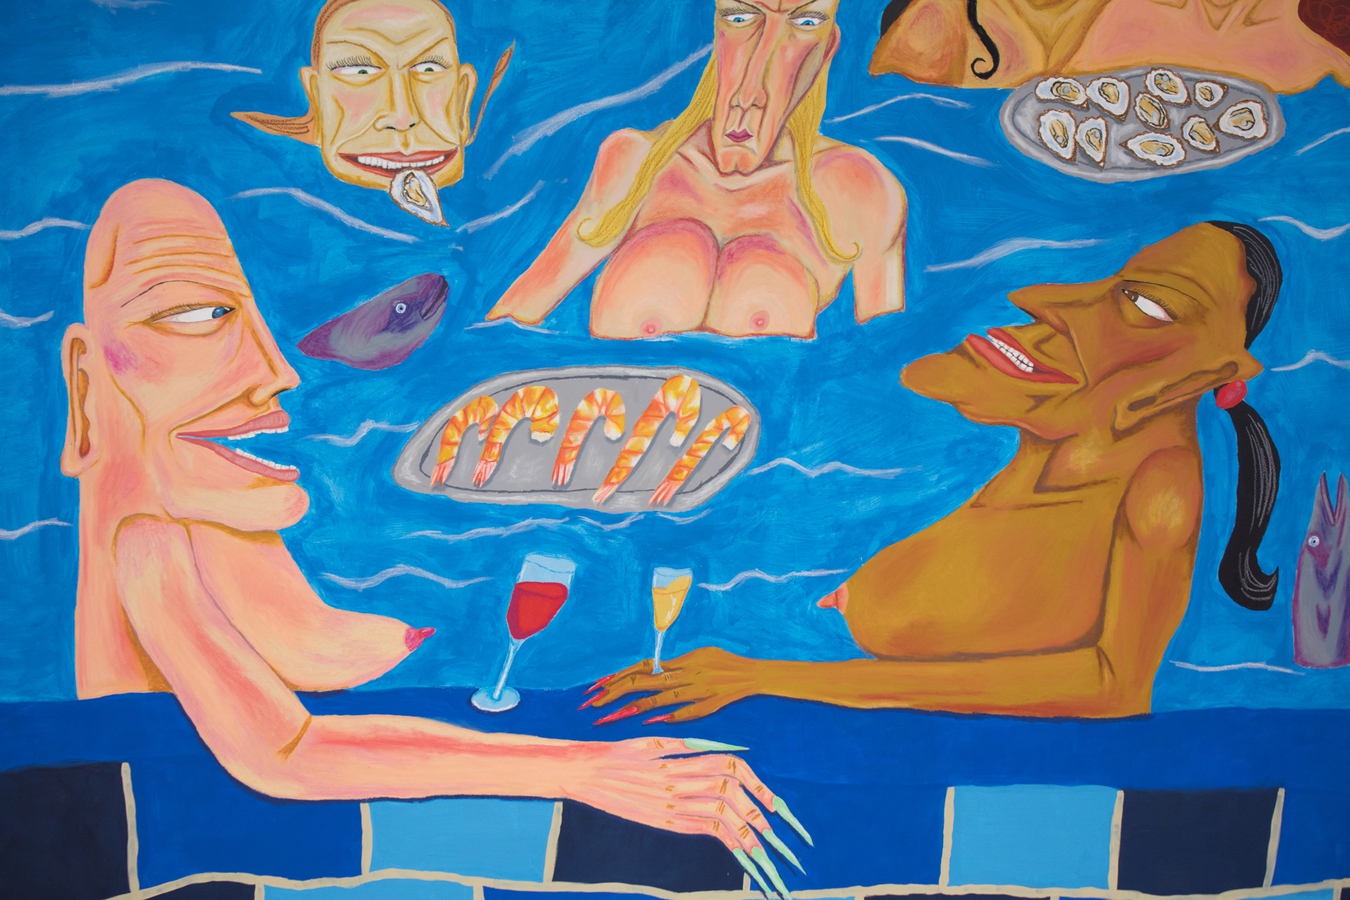 Image: Priscilla Rose Howe, Pool Party (detail), 2023. Acrylic paint and oil pastels. With thanks to Tyne Gordon for their assistance on this work. Photo by Janneth Gil.